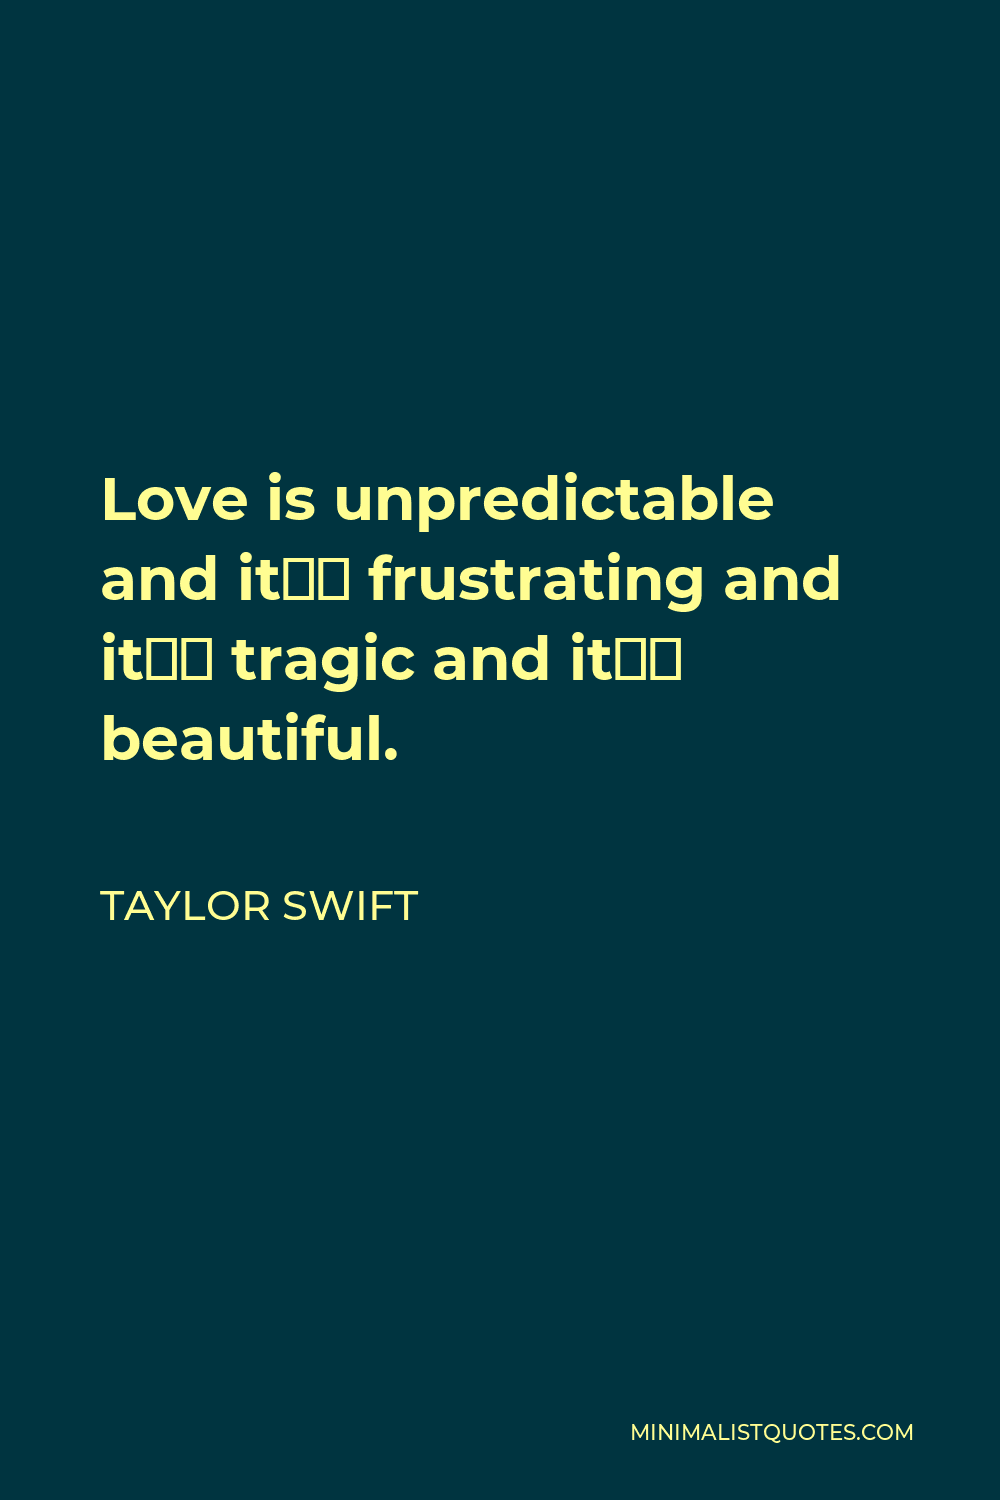 Taylor Swift Quote: Love is unpredictable and it's frustrating and ...